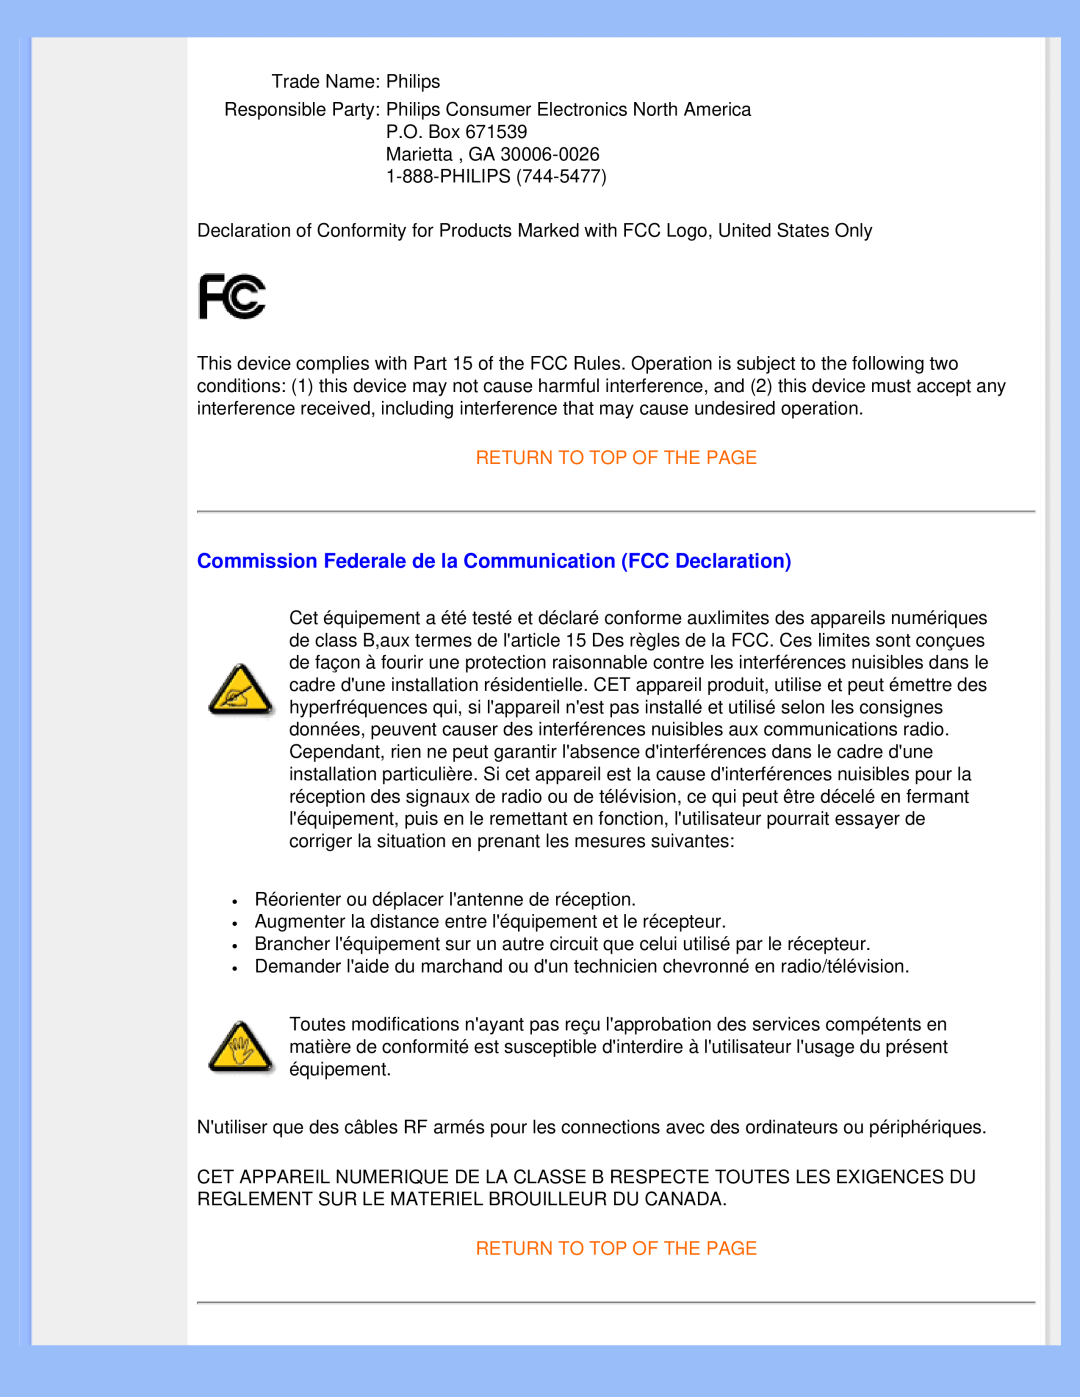 Philips 220WS8 user manual Commission Federale de la Communication FCC Declaration, Return To Top Of The Page 